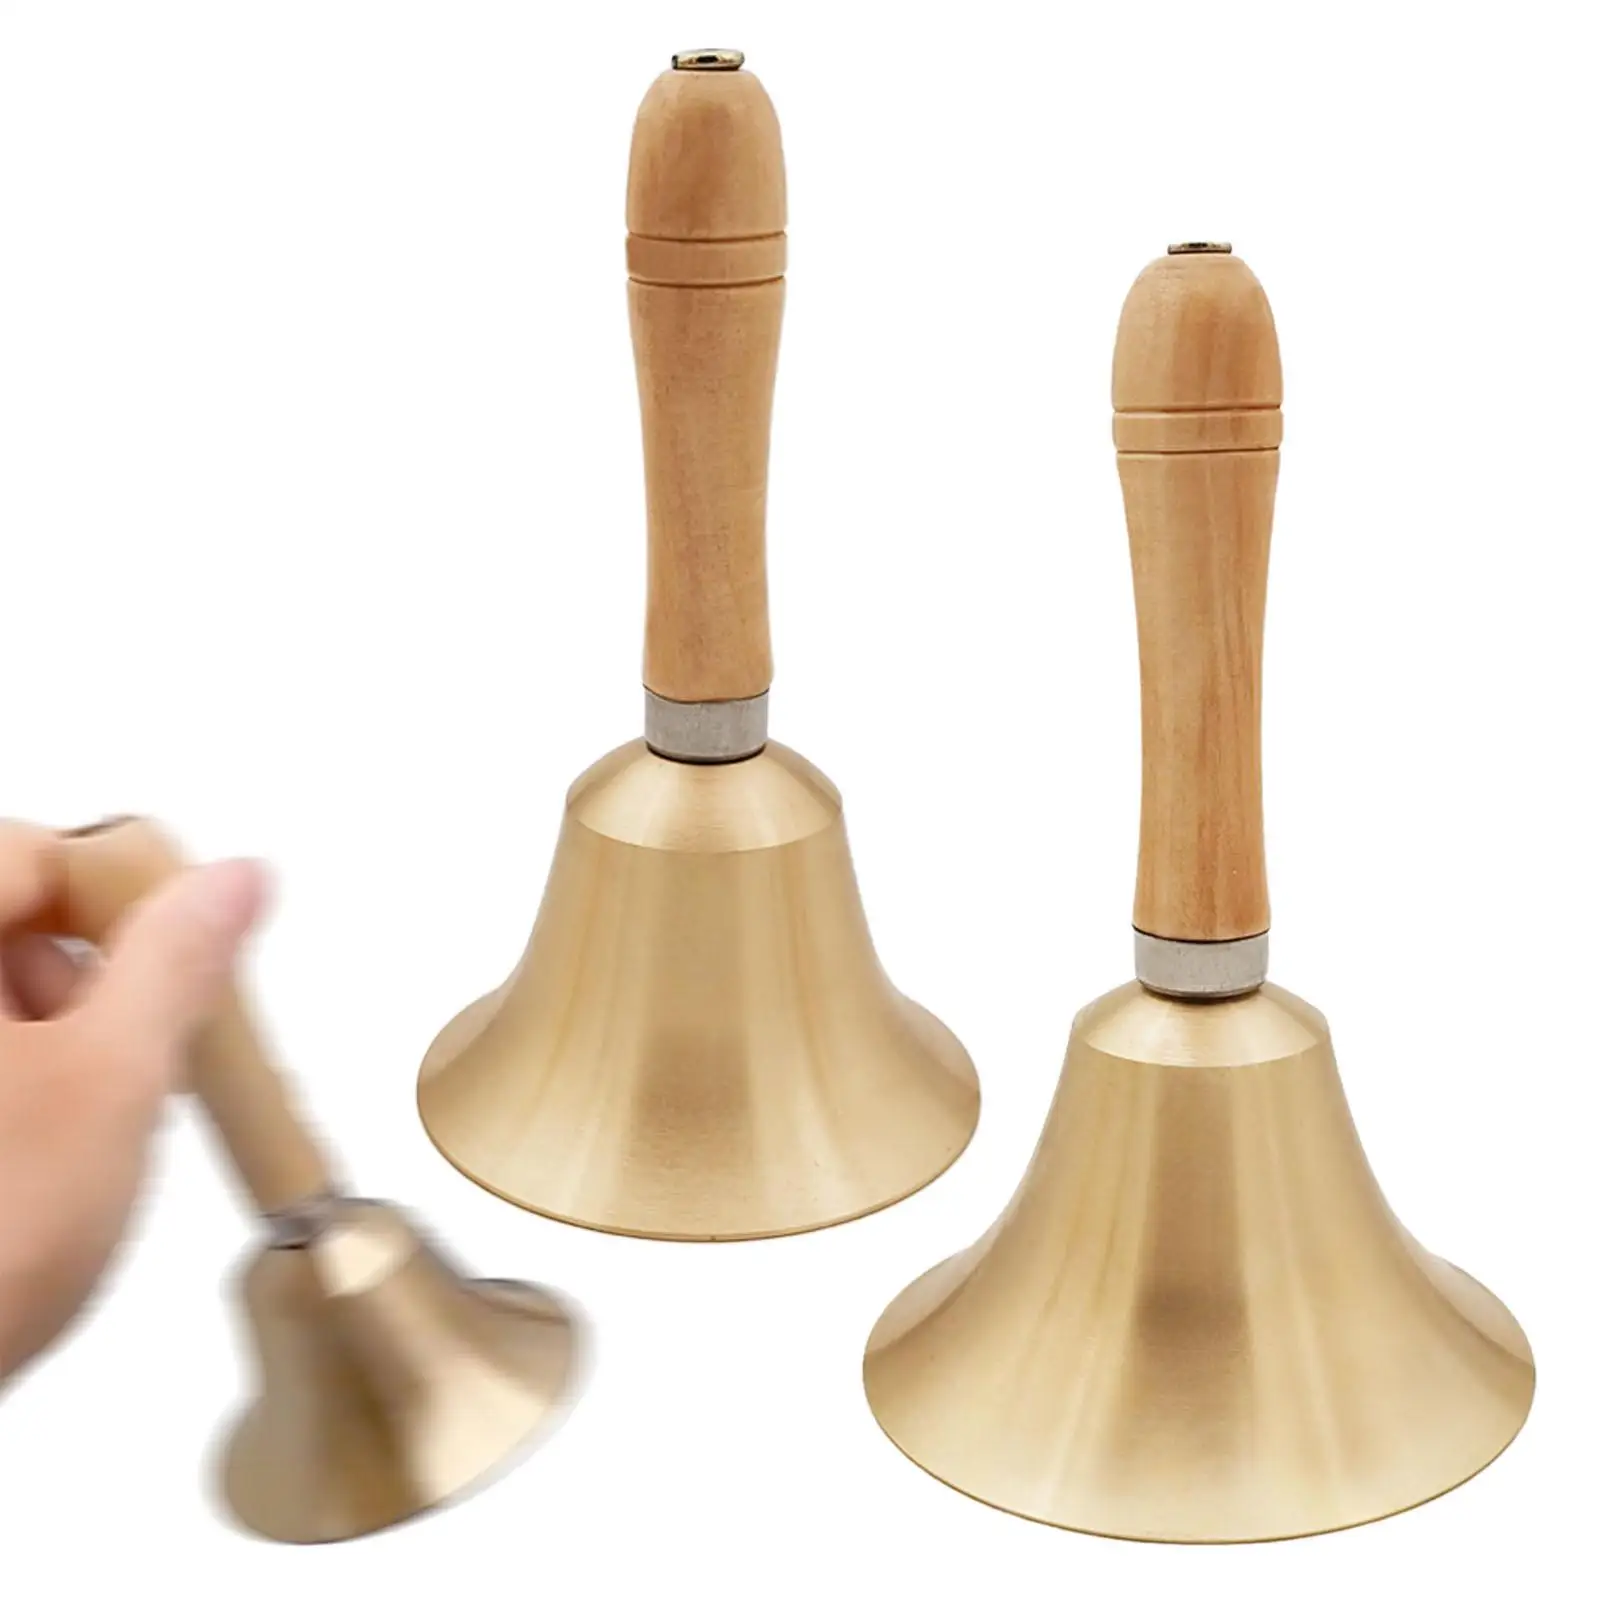 Hand Bell Hand Call Bell Solid Service Bell Handbell Loud Hand Held Bell Dinner Bell for Game Hotel Events Kitchen Restaurant